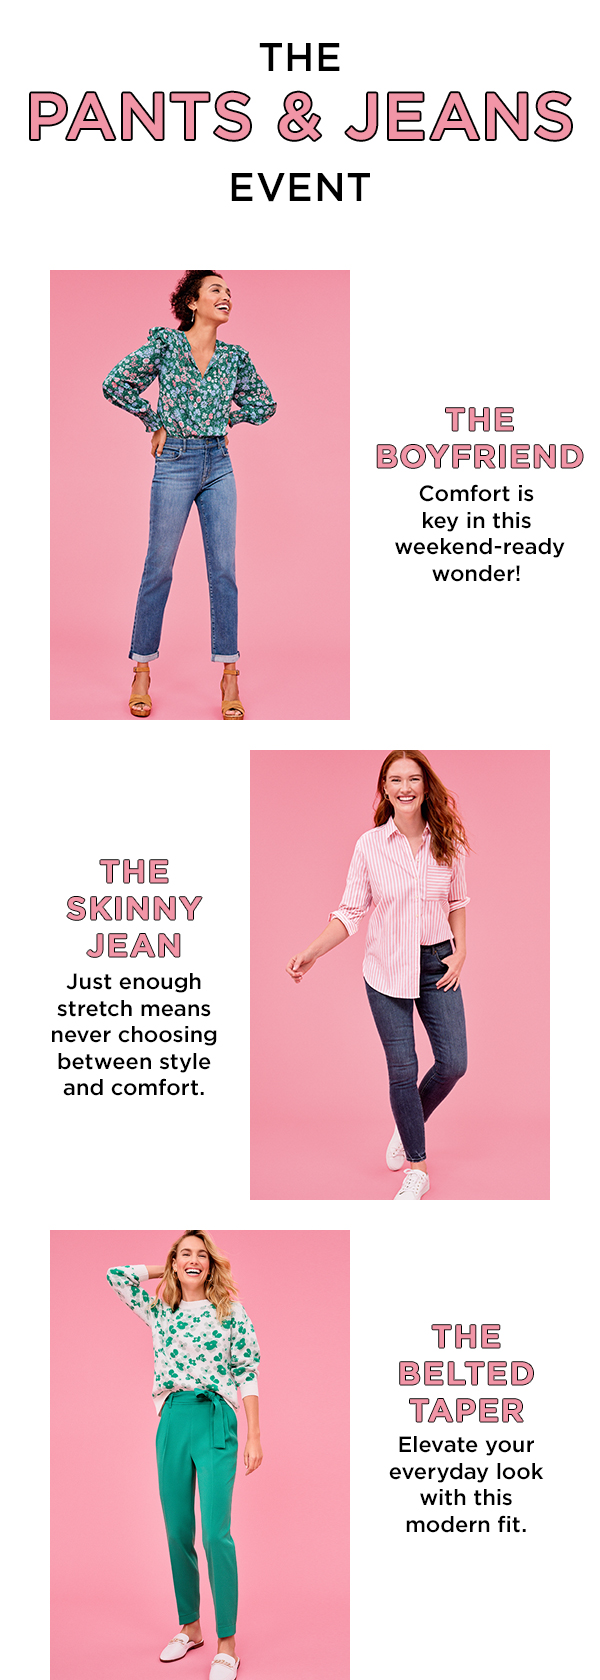 THE PANTS JEANS EVENT THE BOYFRIEND Comfort is key in this weekend-ready wonder! THE SKINNY ' JEAN ! Just enough Z stretch means never choosing between style and comfort. THE BELTED TAPER Elevate your everyday look with this modern fit. 